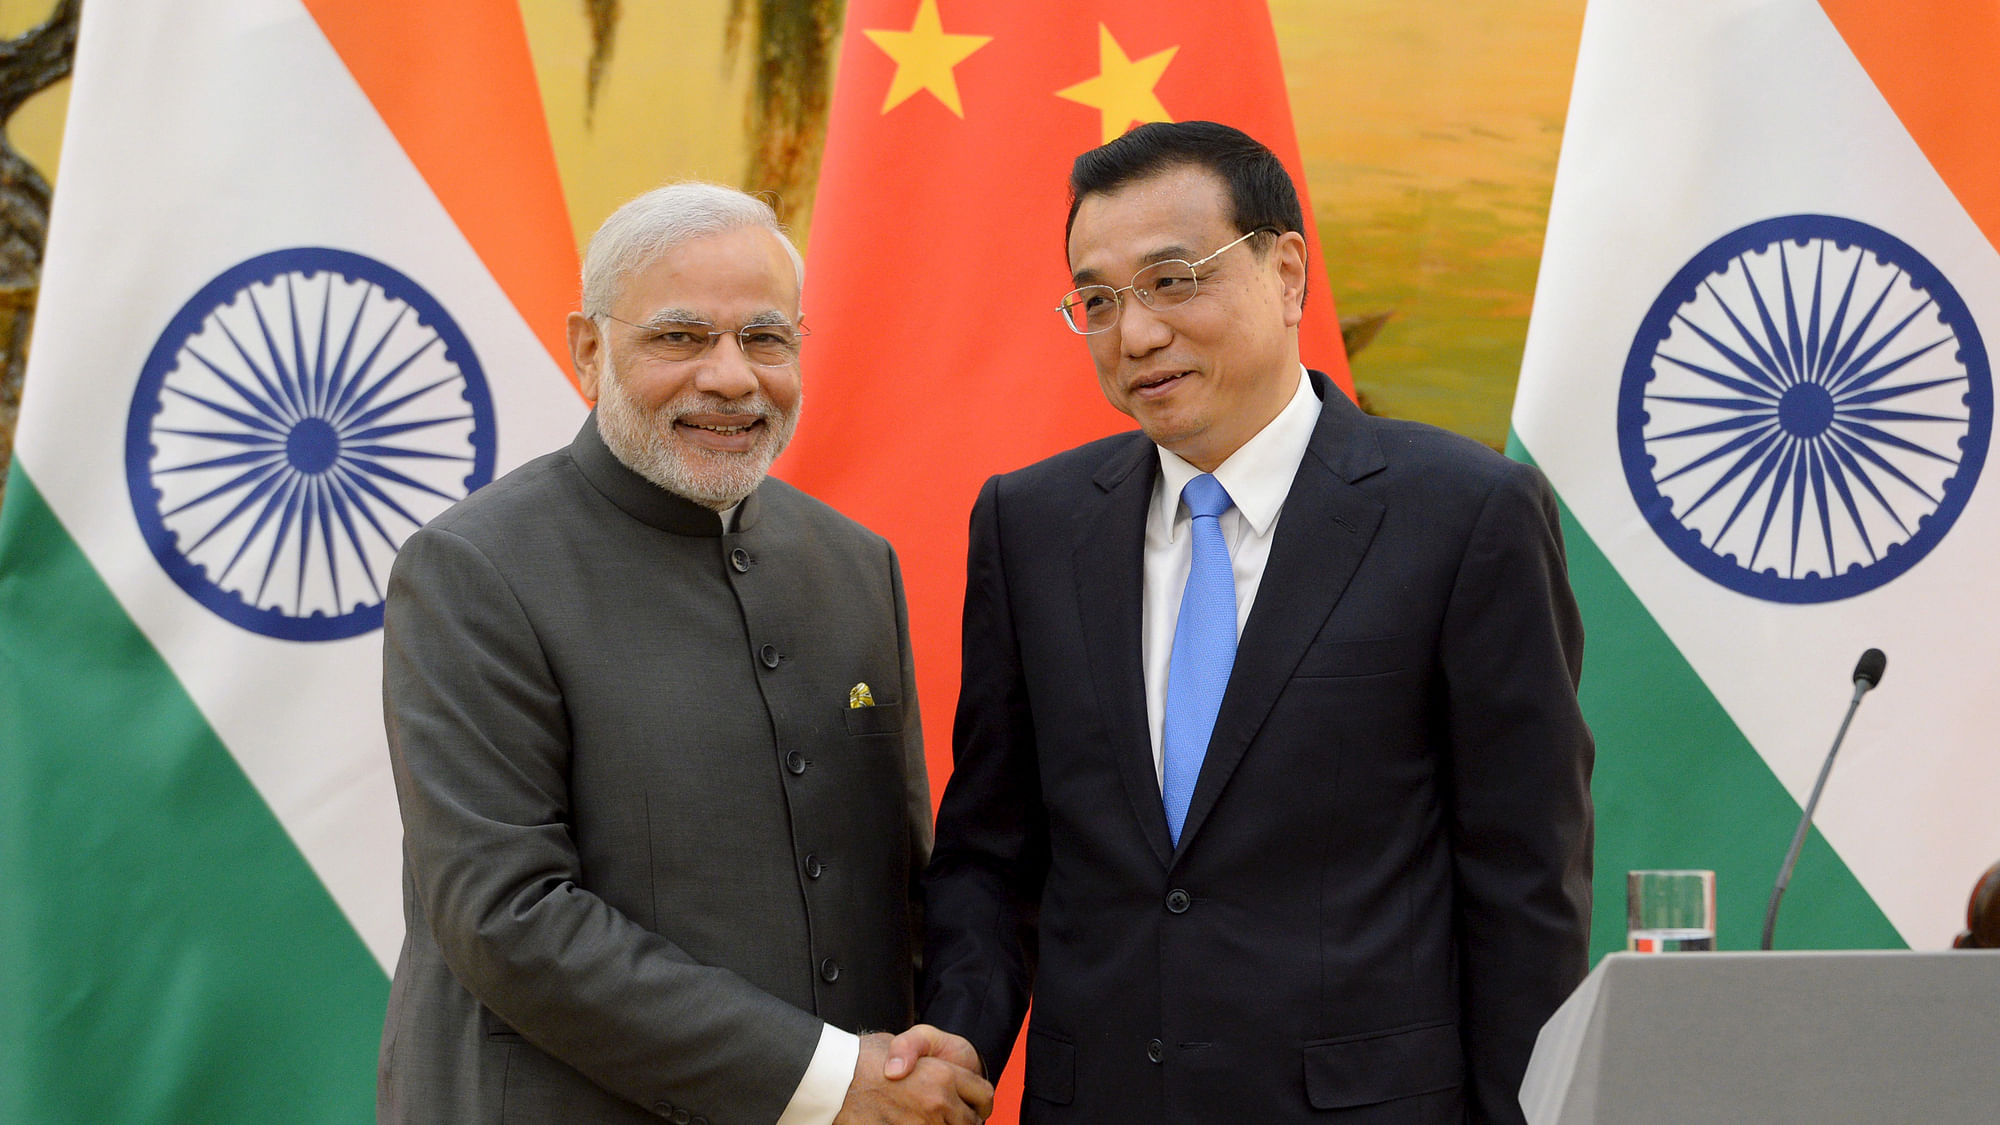 Prime Minister Narendra Modi (L) shakes hands with Chinese Premier Li Keqiang during a news conference at the Great Hall of the People in Beijing, China, May 15, 2015. (Photo:&nbsp;Reuters)<!--EndFragment-->